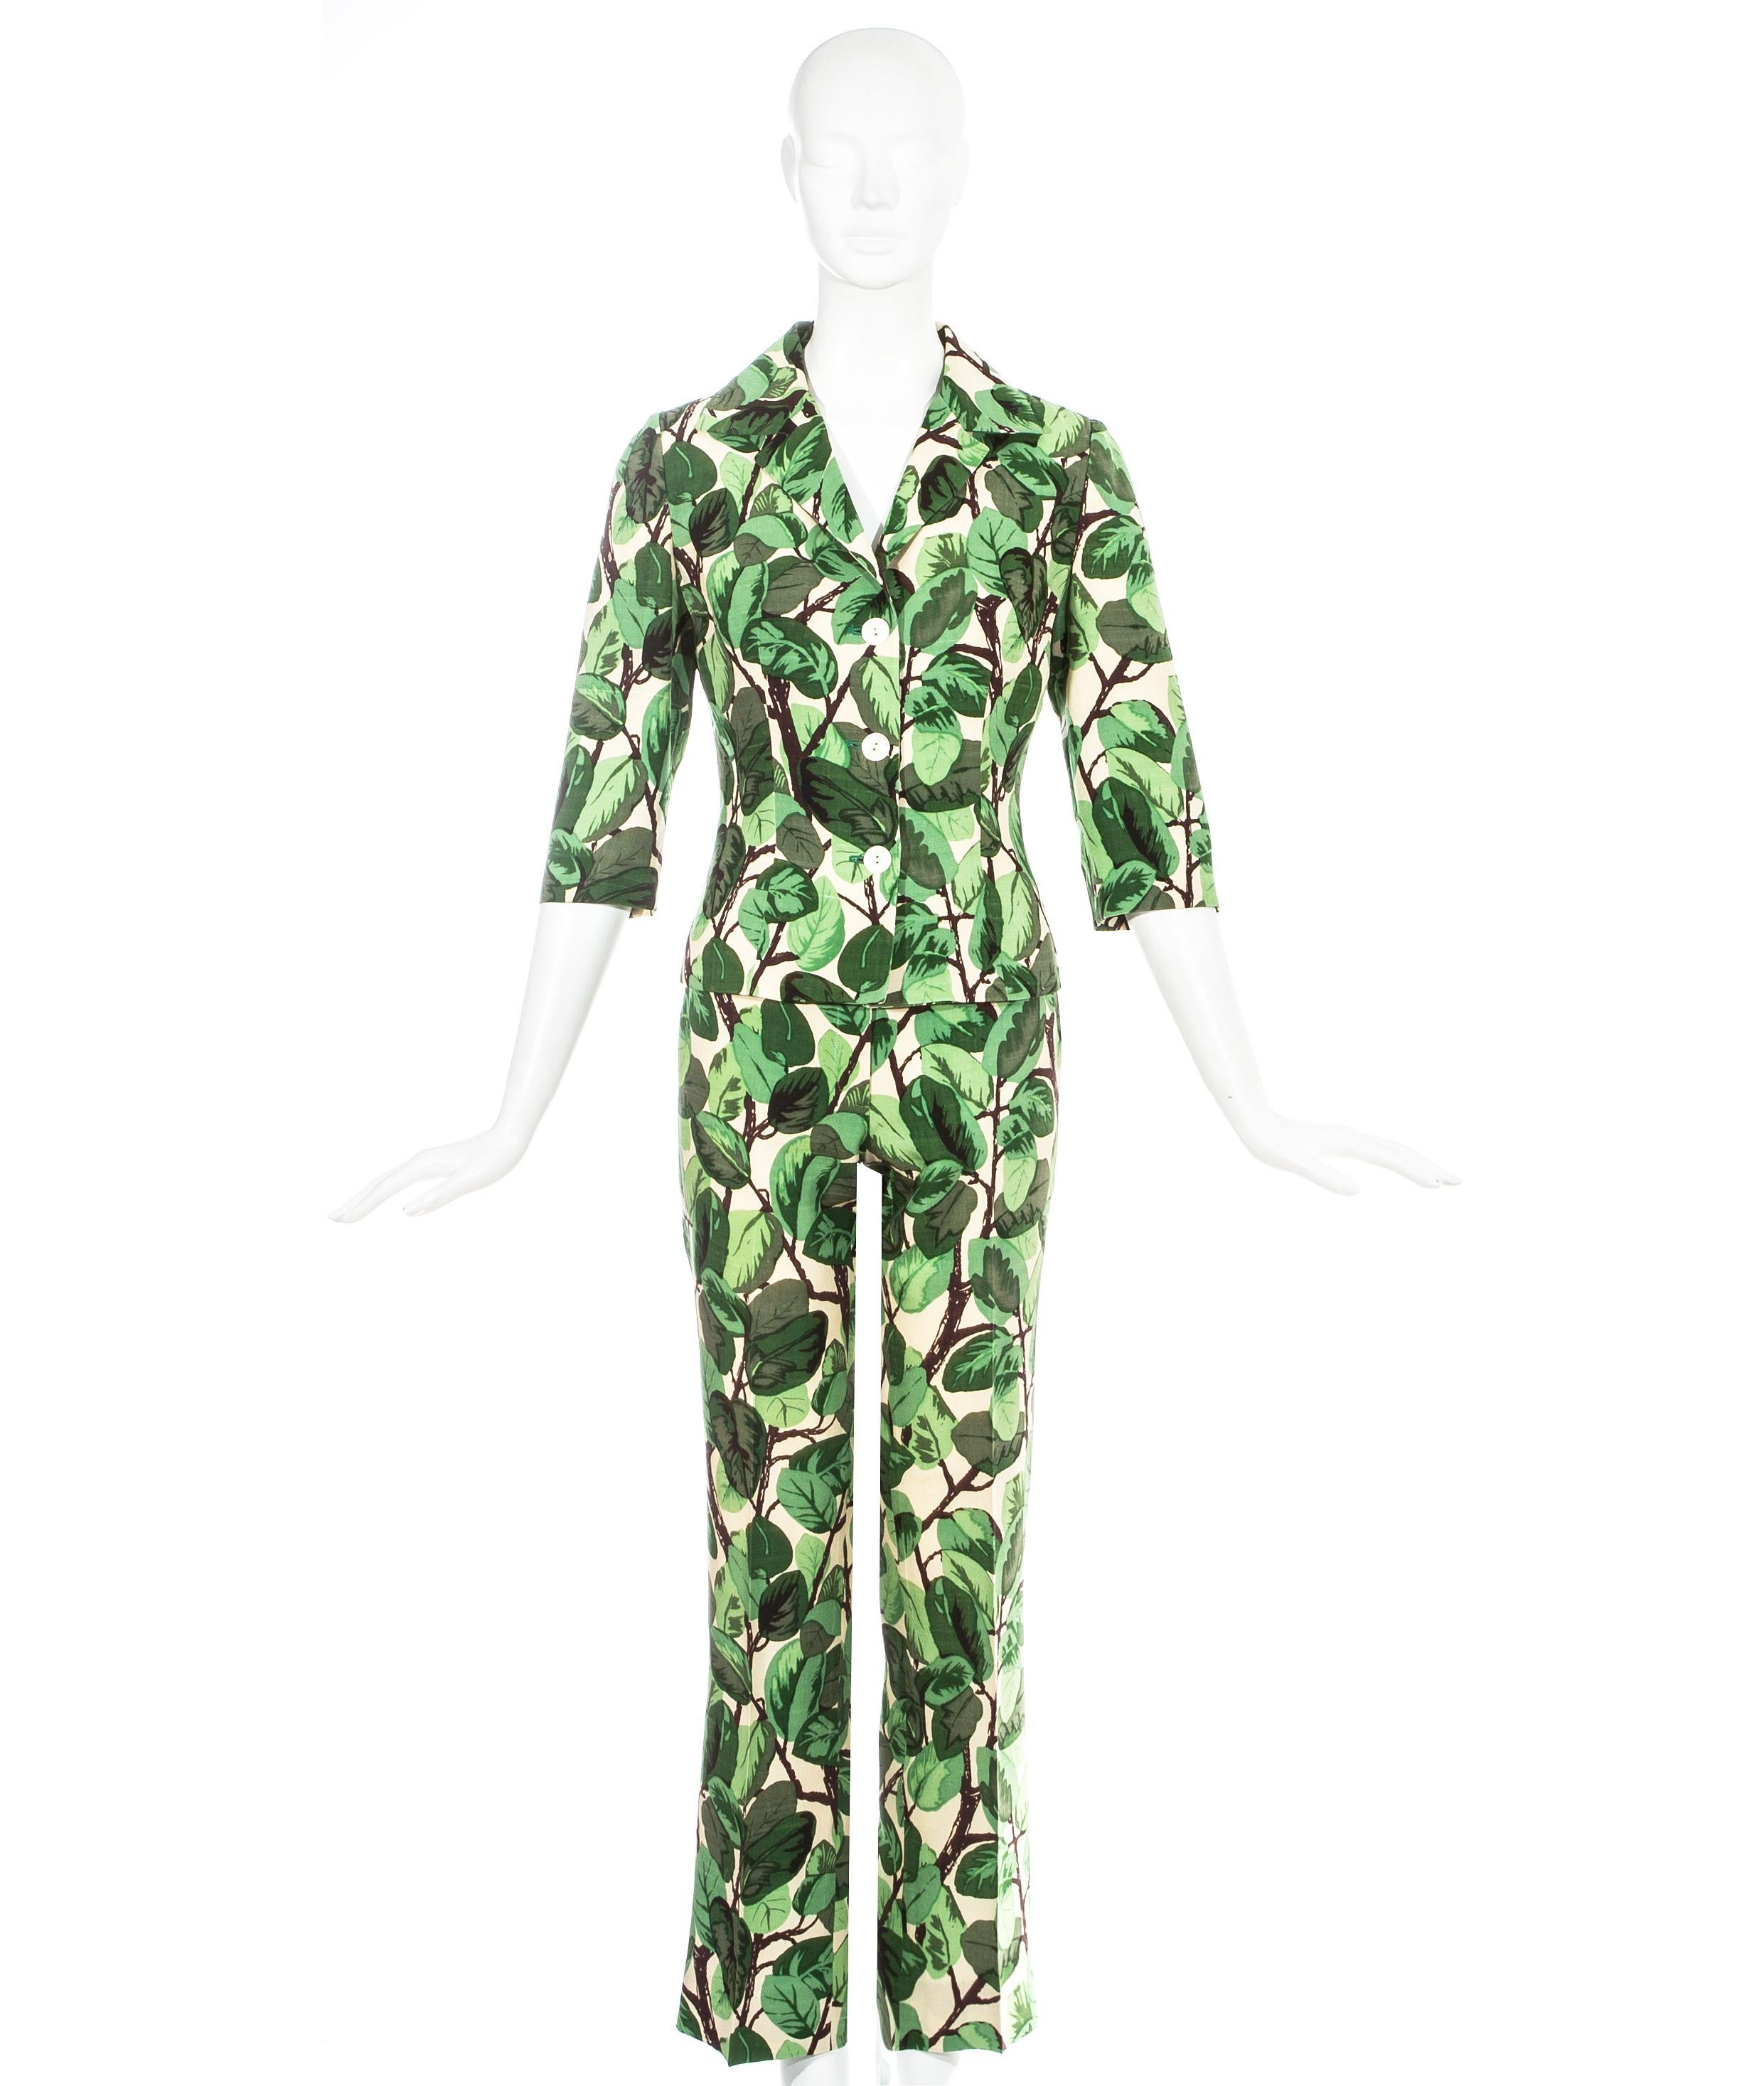 Dolce & Gabbana white and green foliage print silk linen pant suit. Fitted jacket with cropped sleeves and slim fit pants.

Spring-Summer 1997